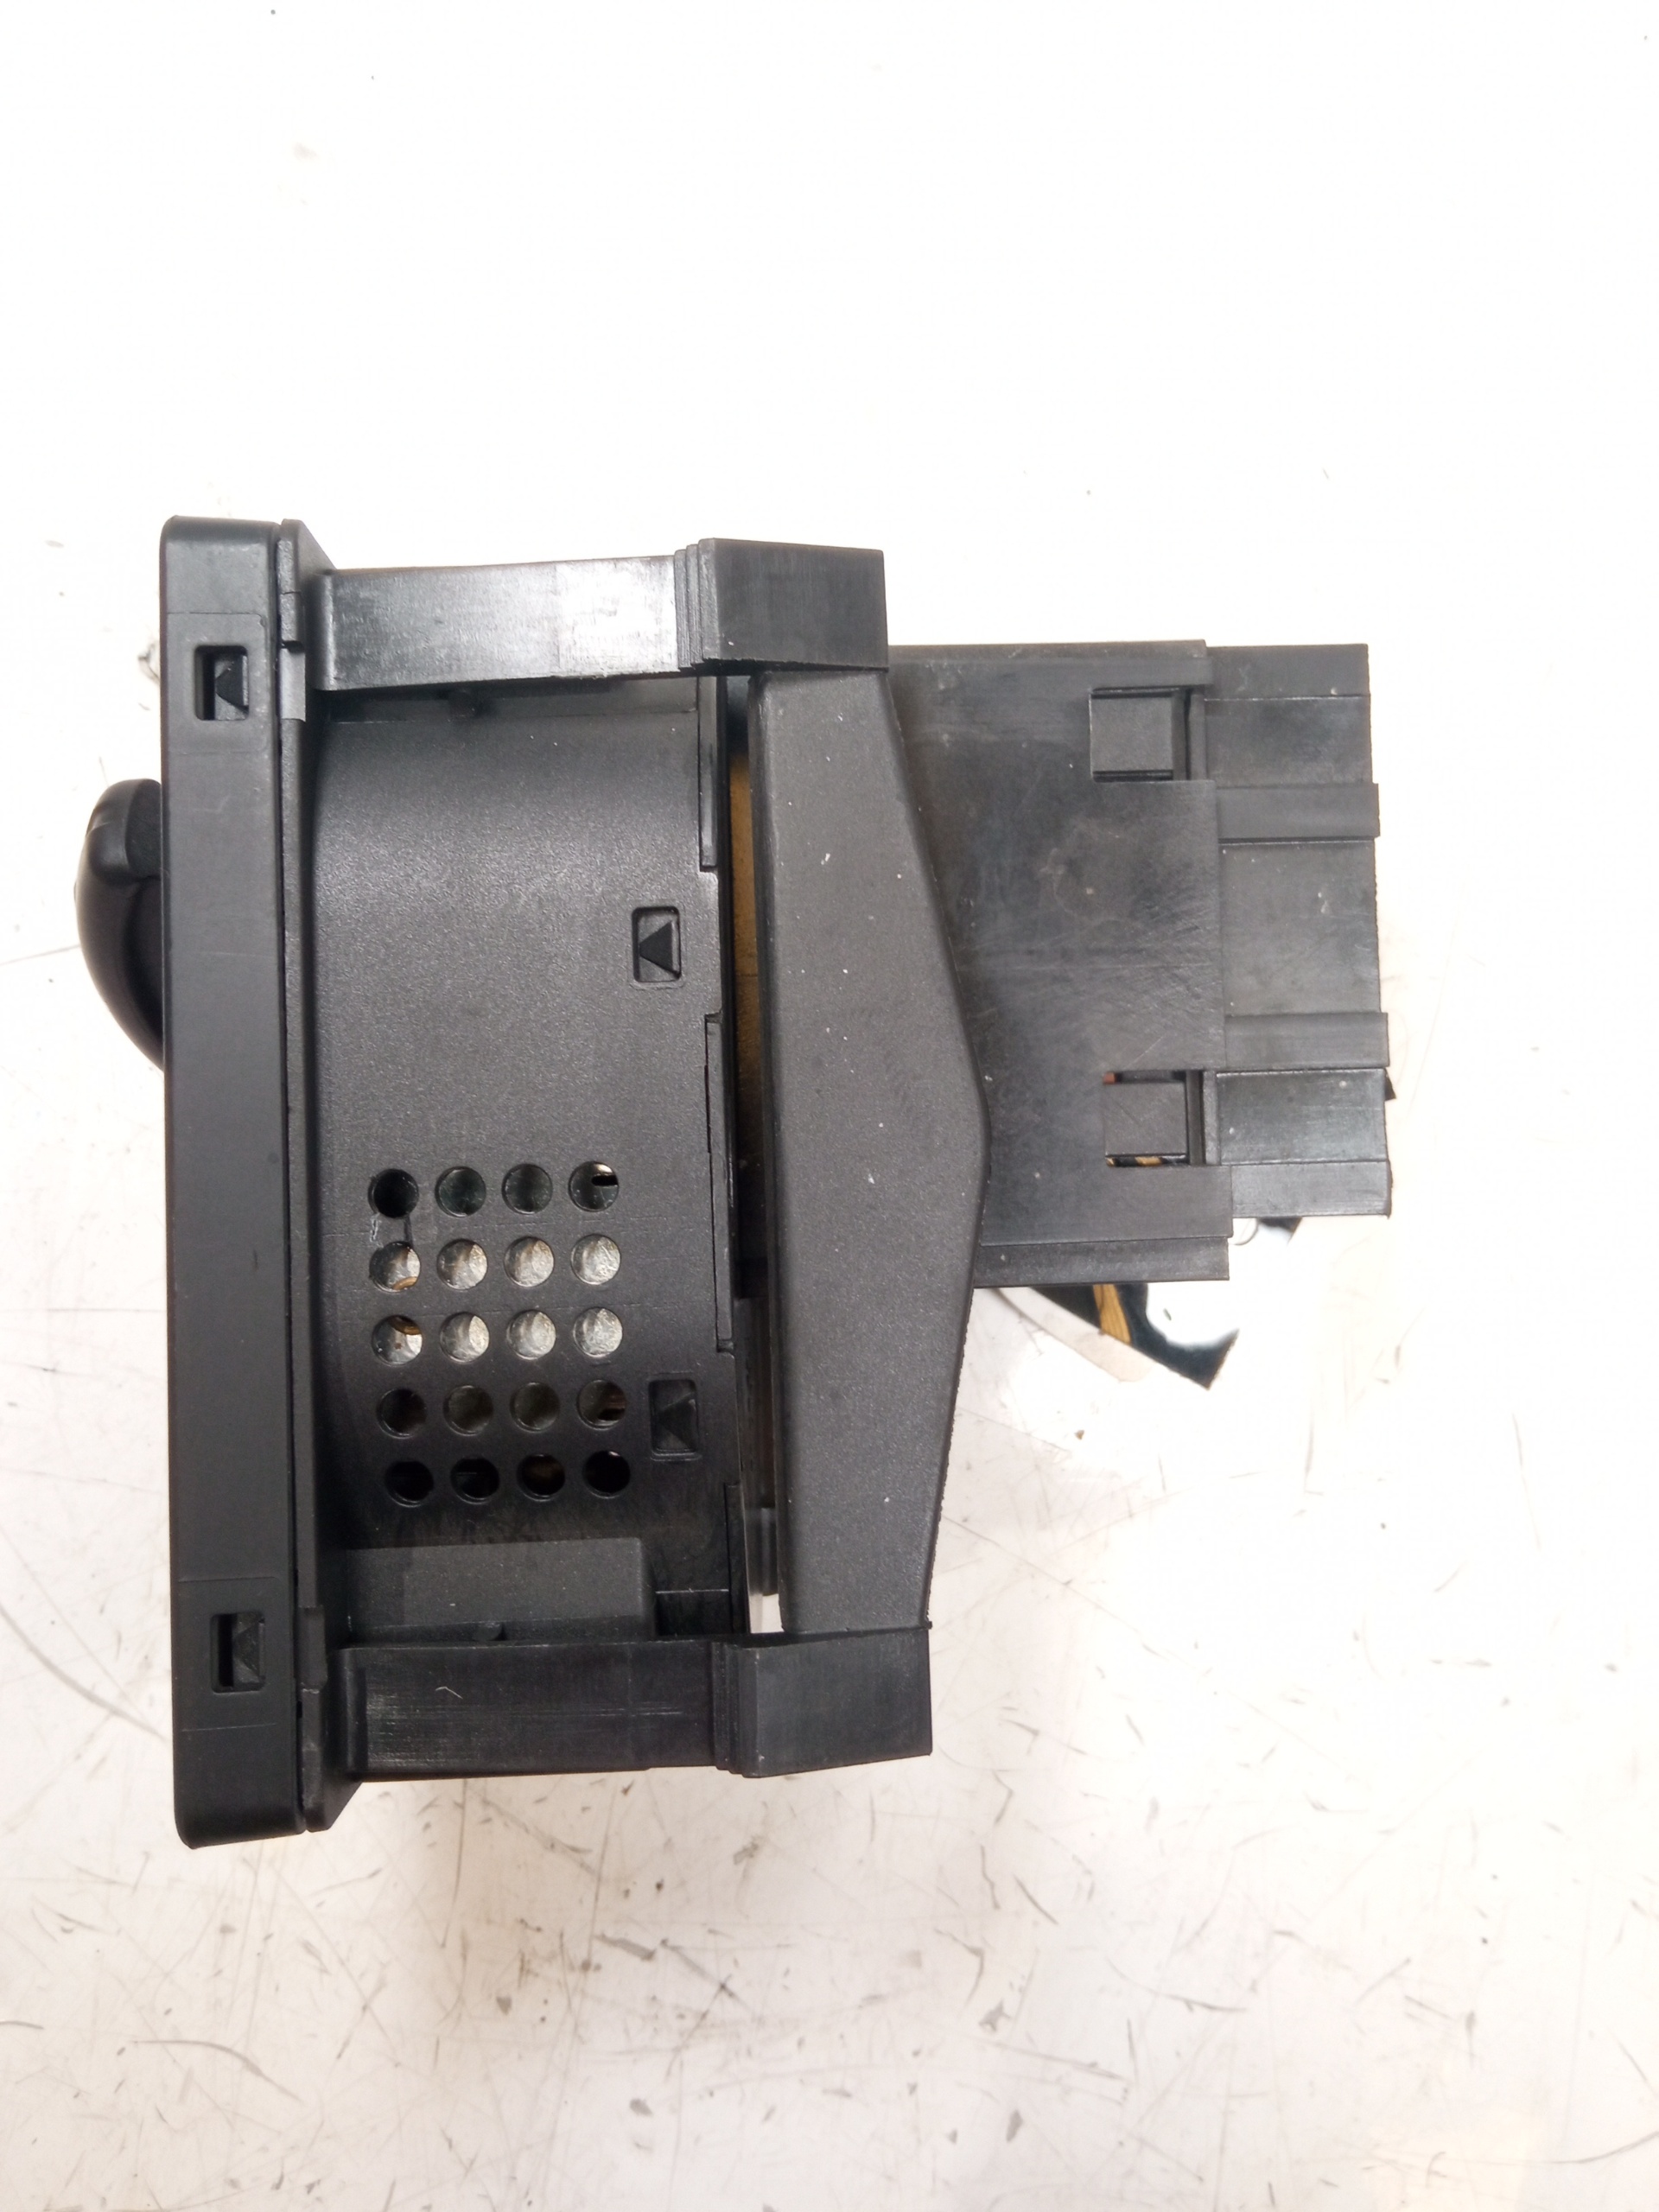 FORD Focus 2 generation (2004-2011) Headlight Switch Control Unit 7M5T13A024CA, 16PINES 25211292